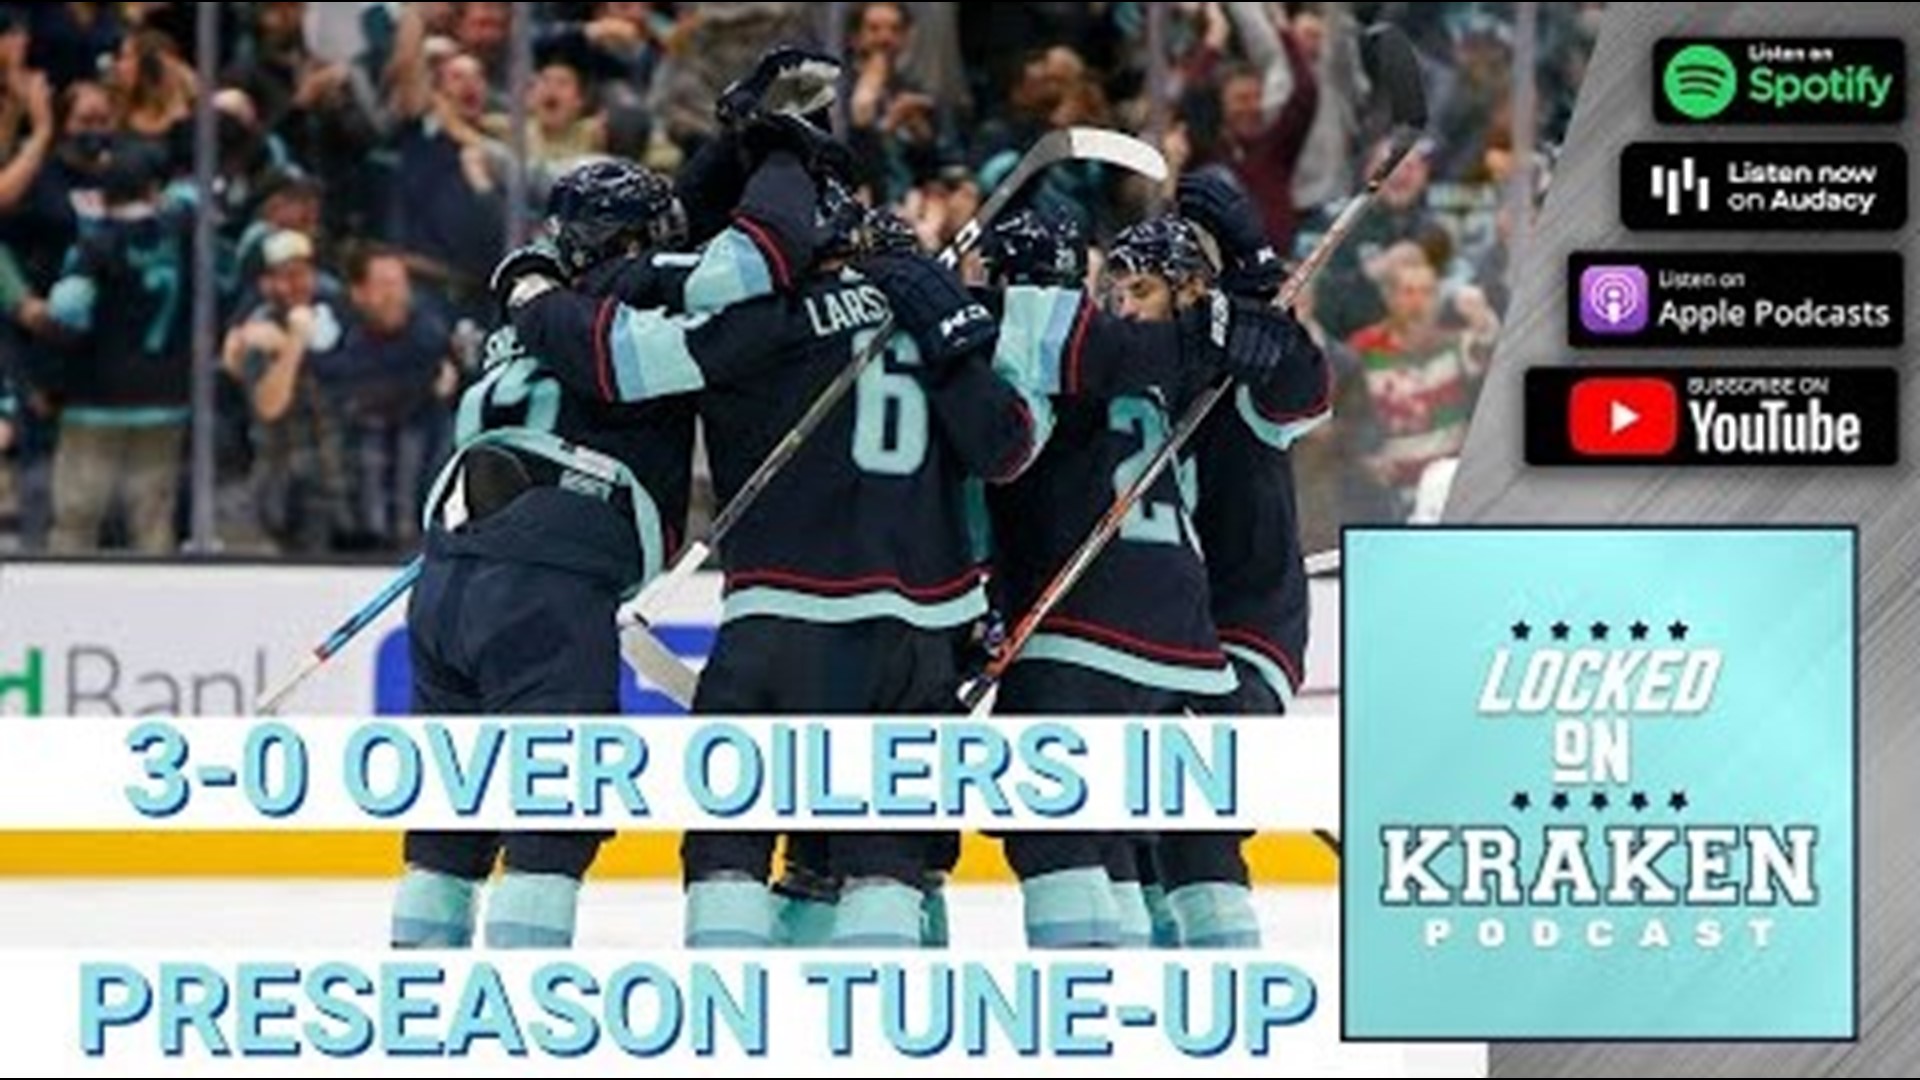 The Seattle Kraken got a 3-0 win over the Edmonton Oilers in their first-ever preseason game at Climate Pledge Arena.